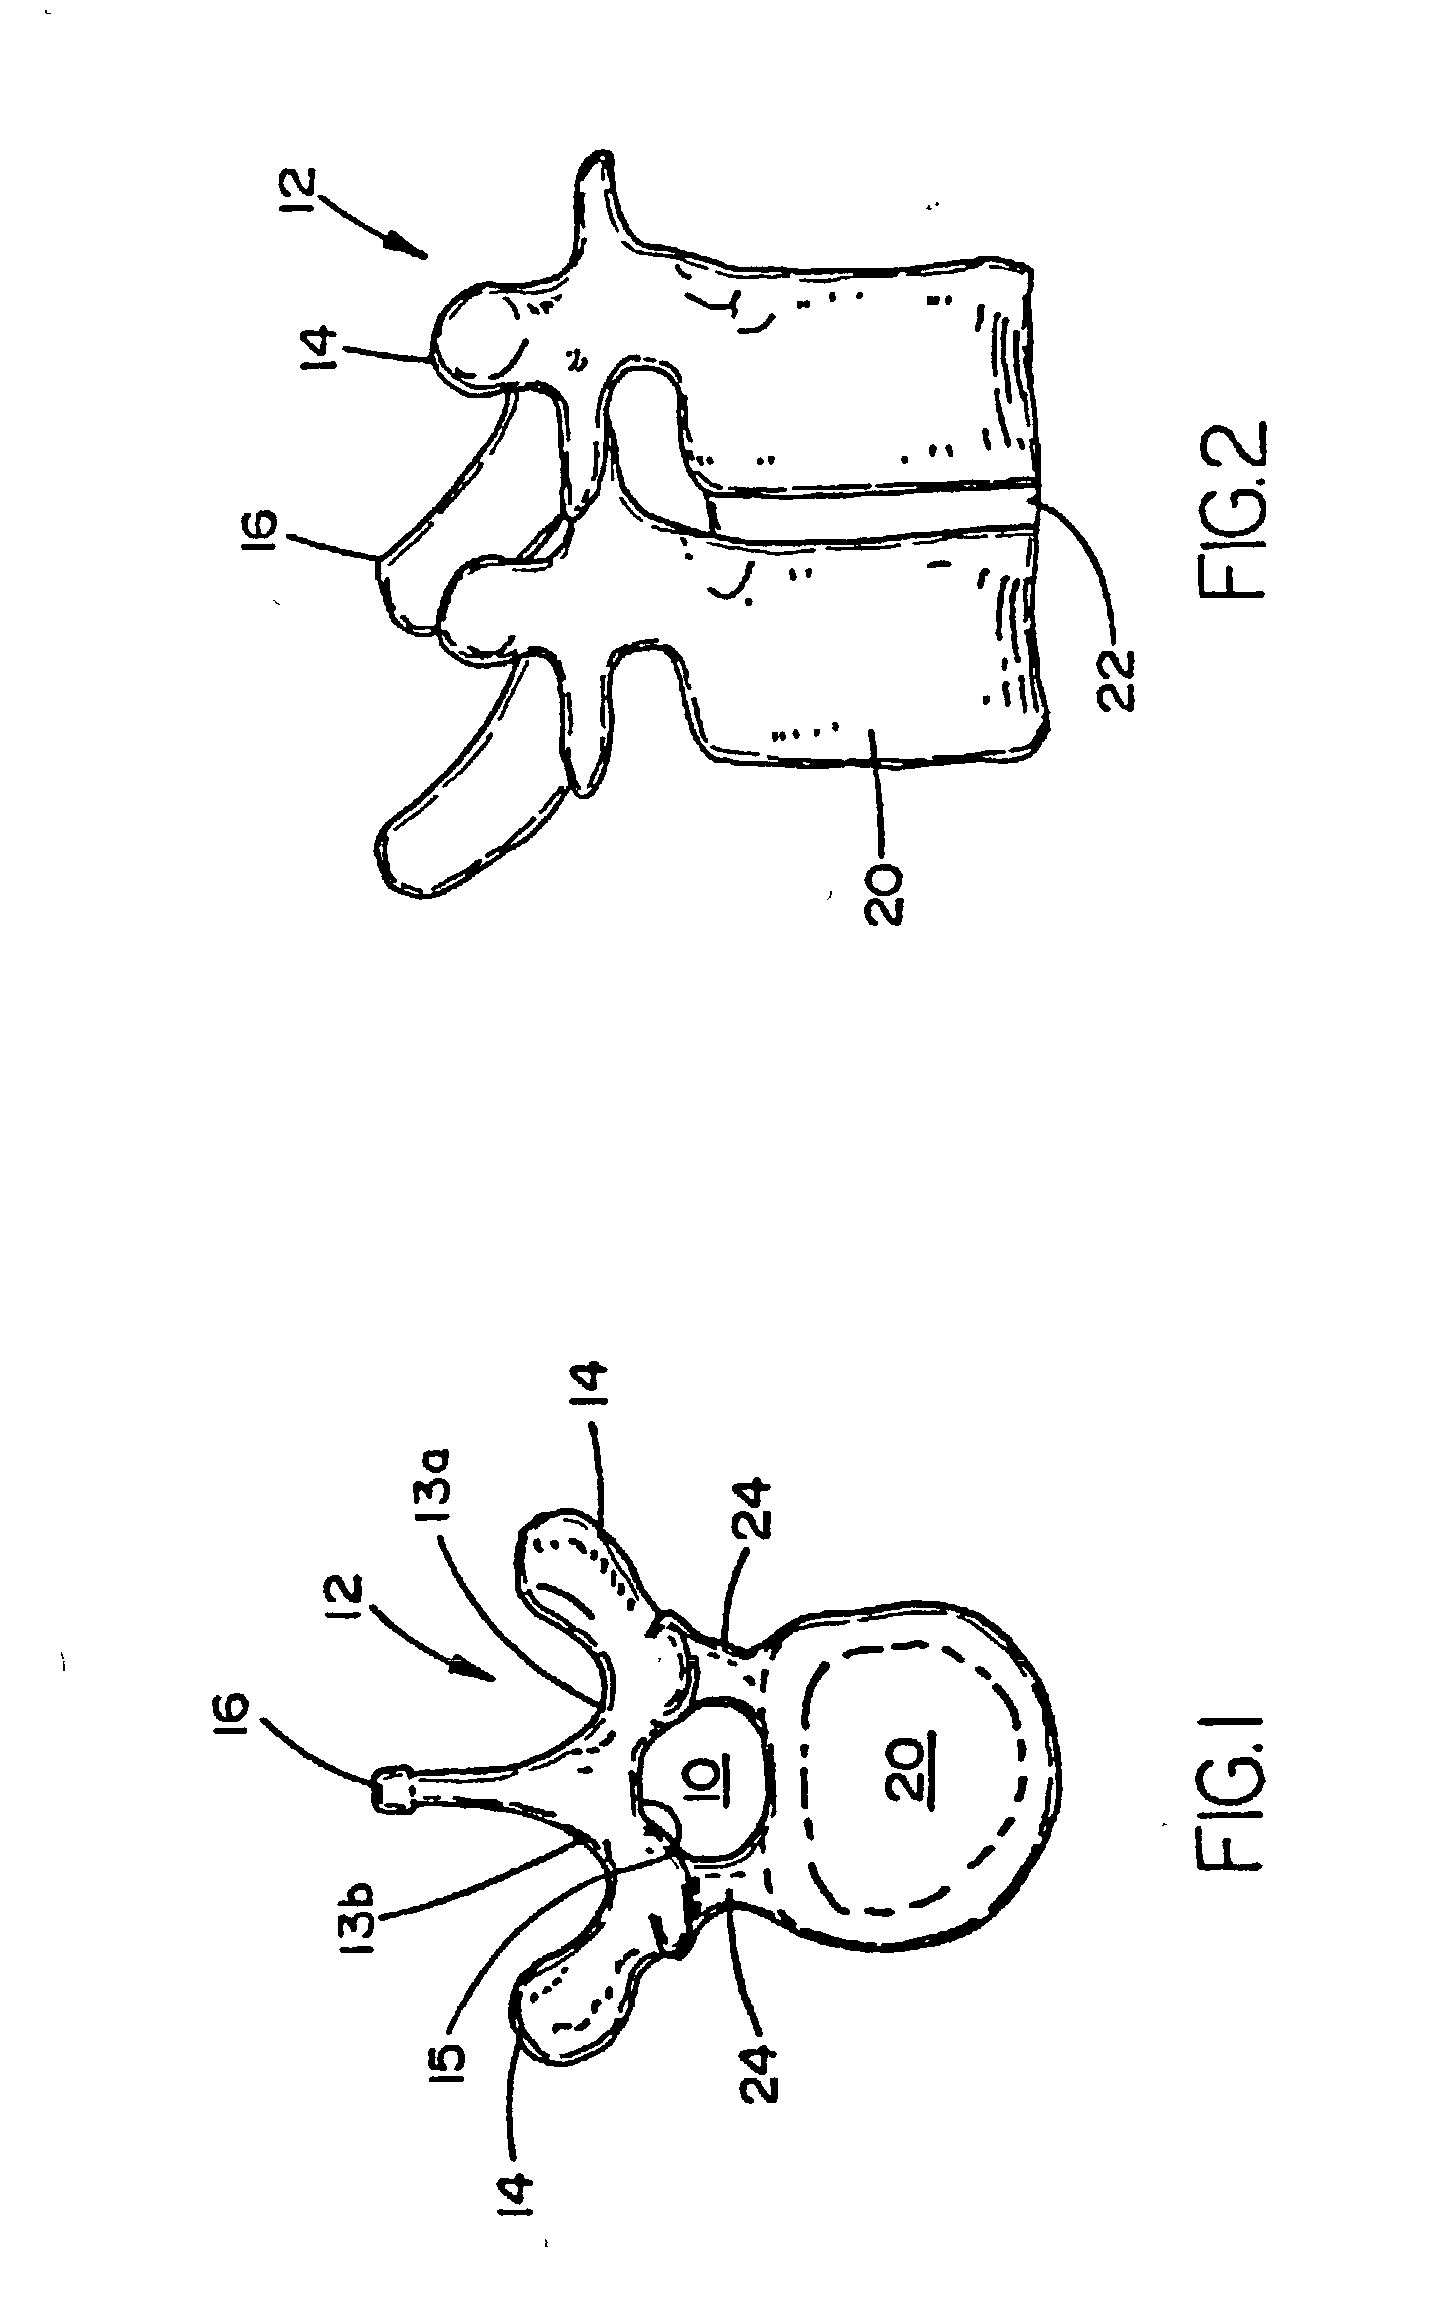 Adjustable tandem connectors for corrective devices for the spinal column and other bones and joints